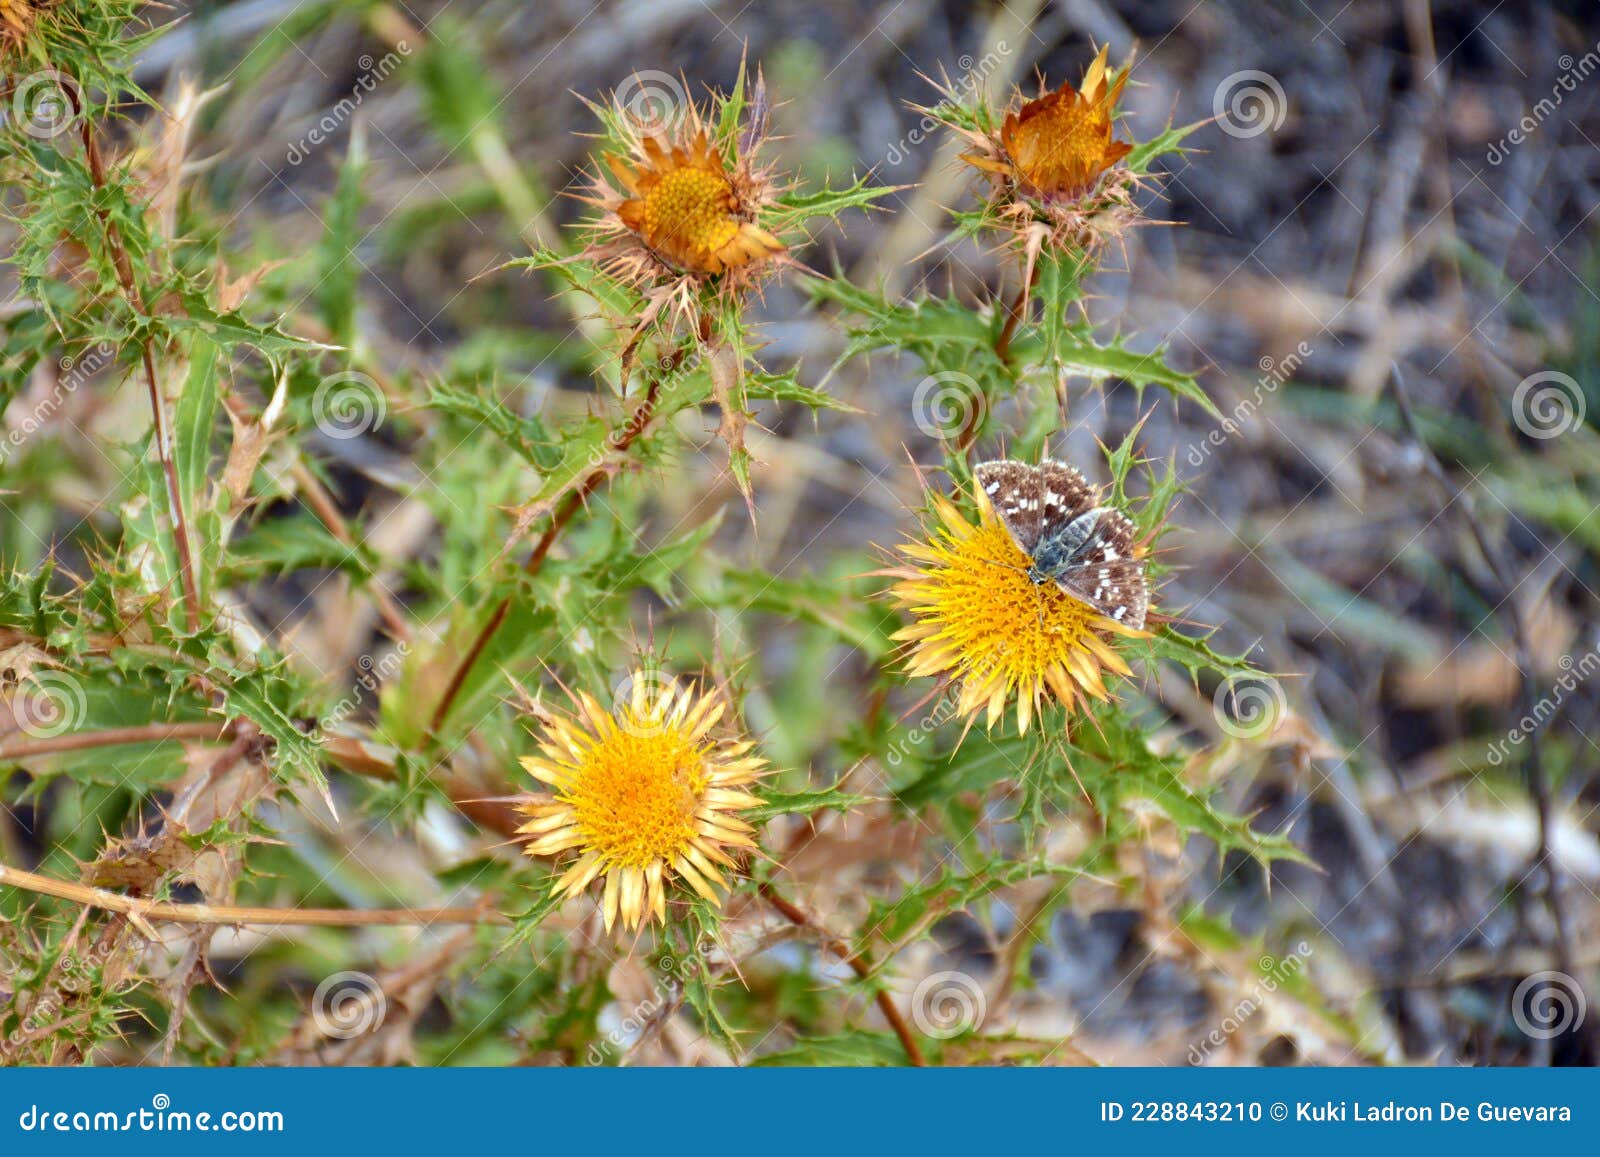 yellow thistle in late summer